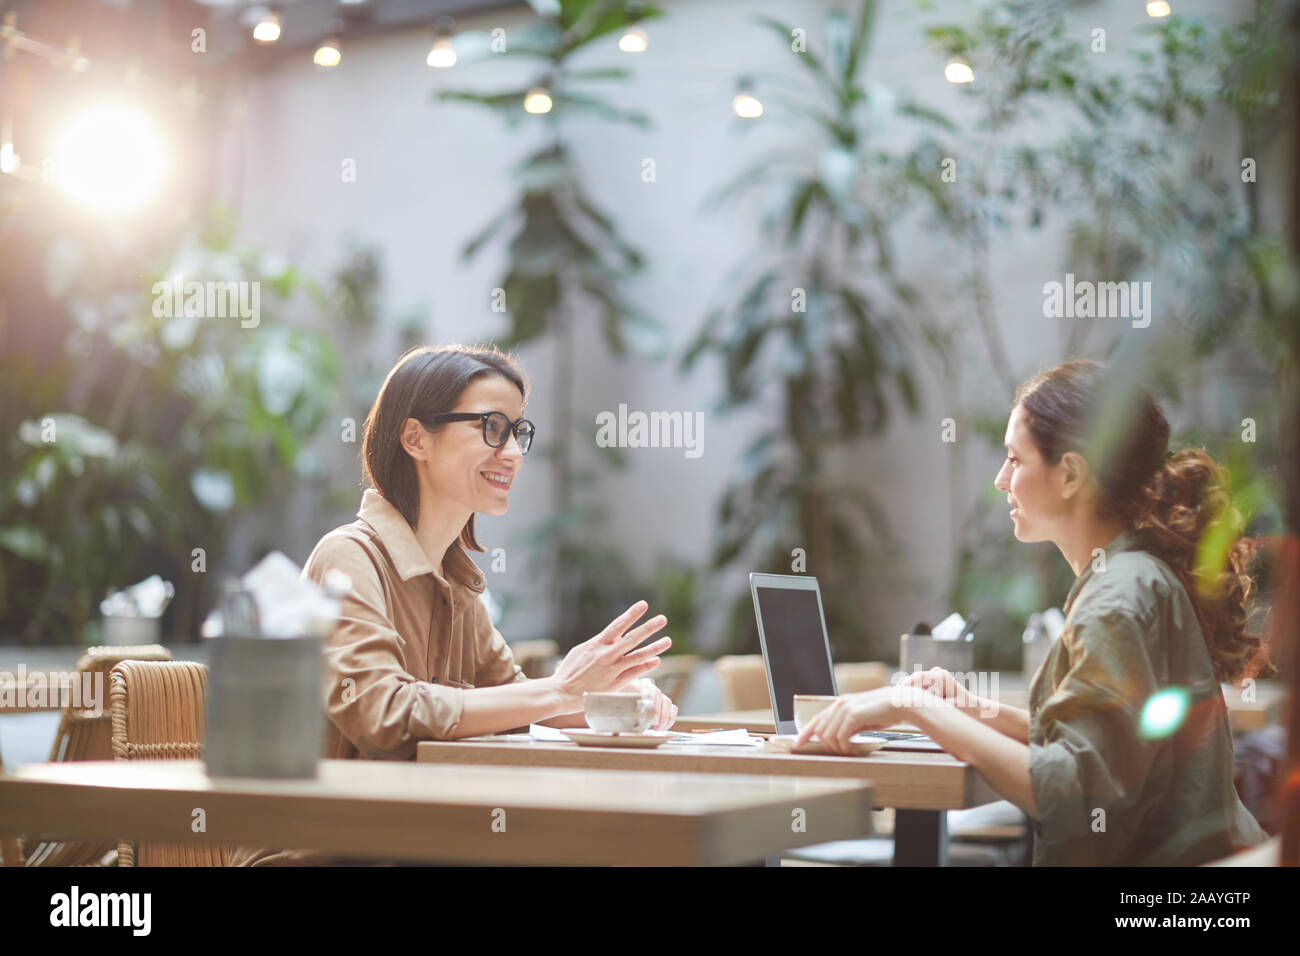 Side view portrait of two modern young women sitting at table in cafe and smiling cheerfully enjoying lunch together, copy space Stock Photo